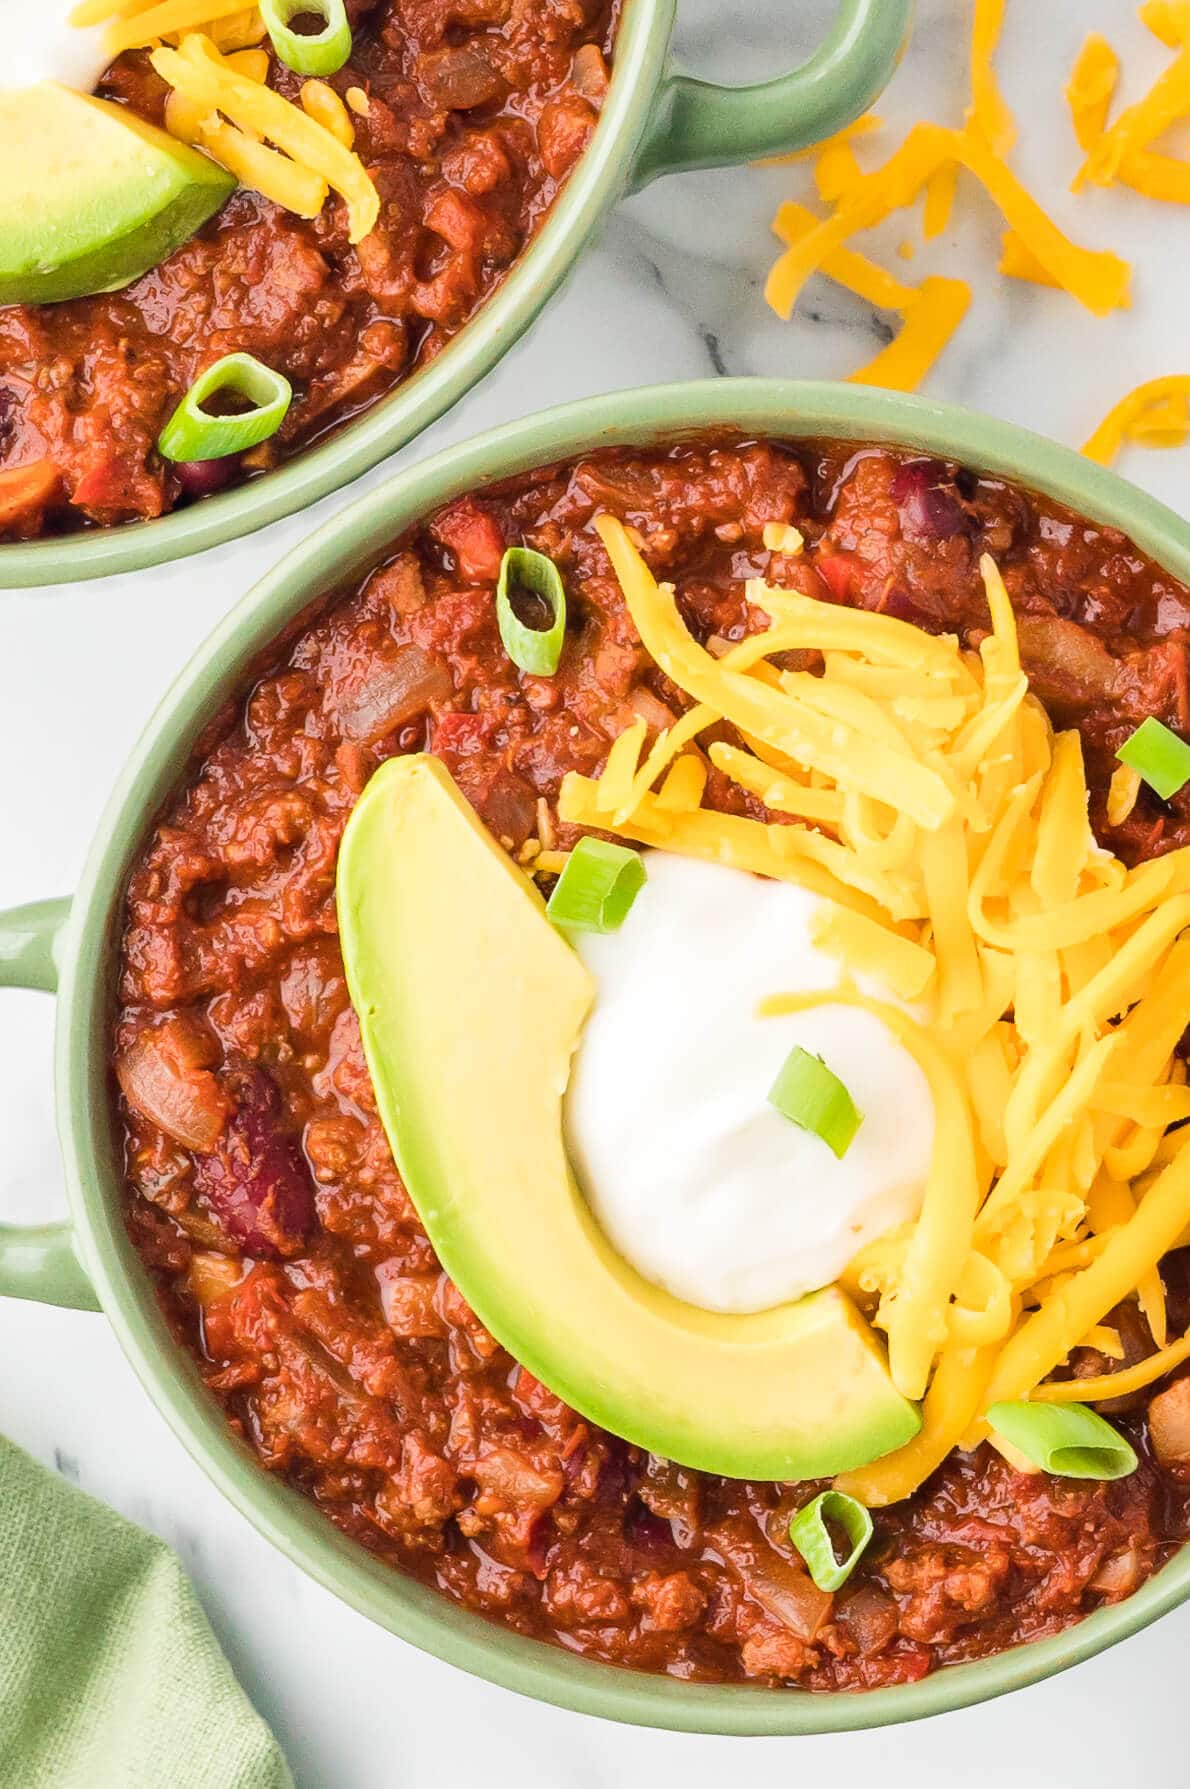 Chili in a bowl with toppings.